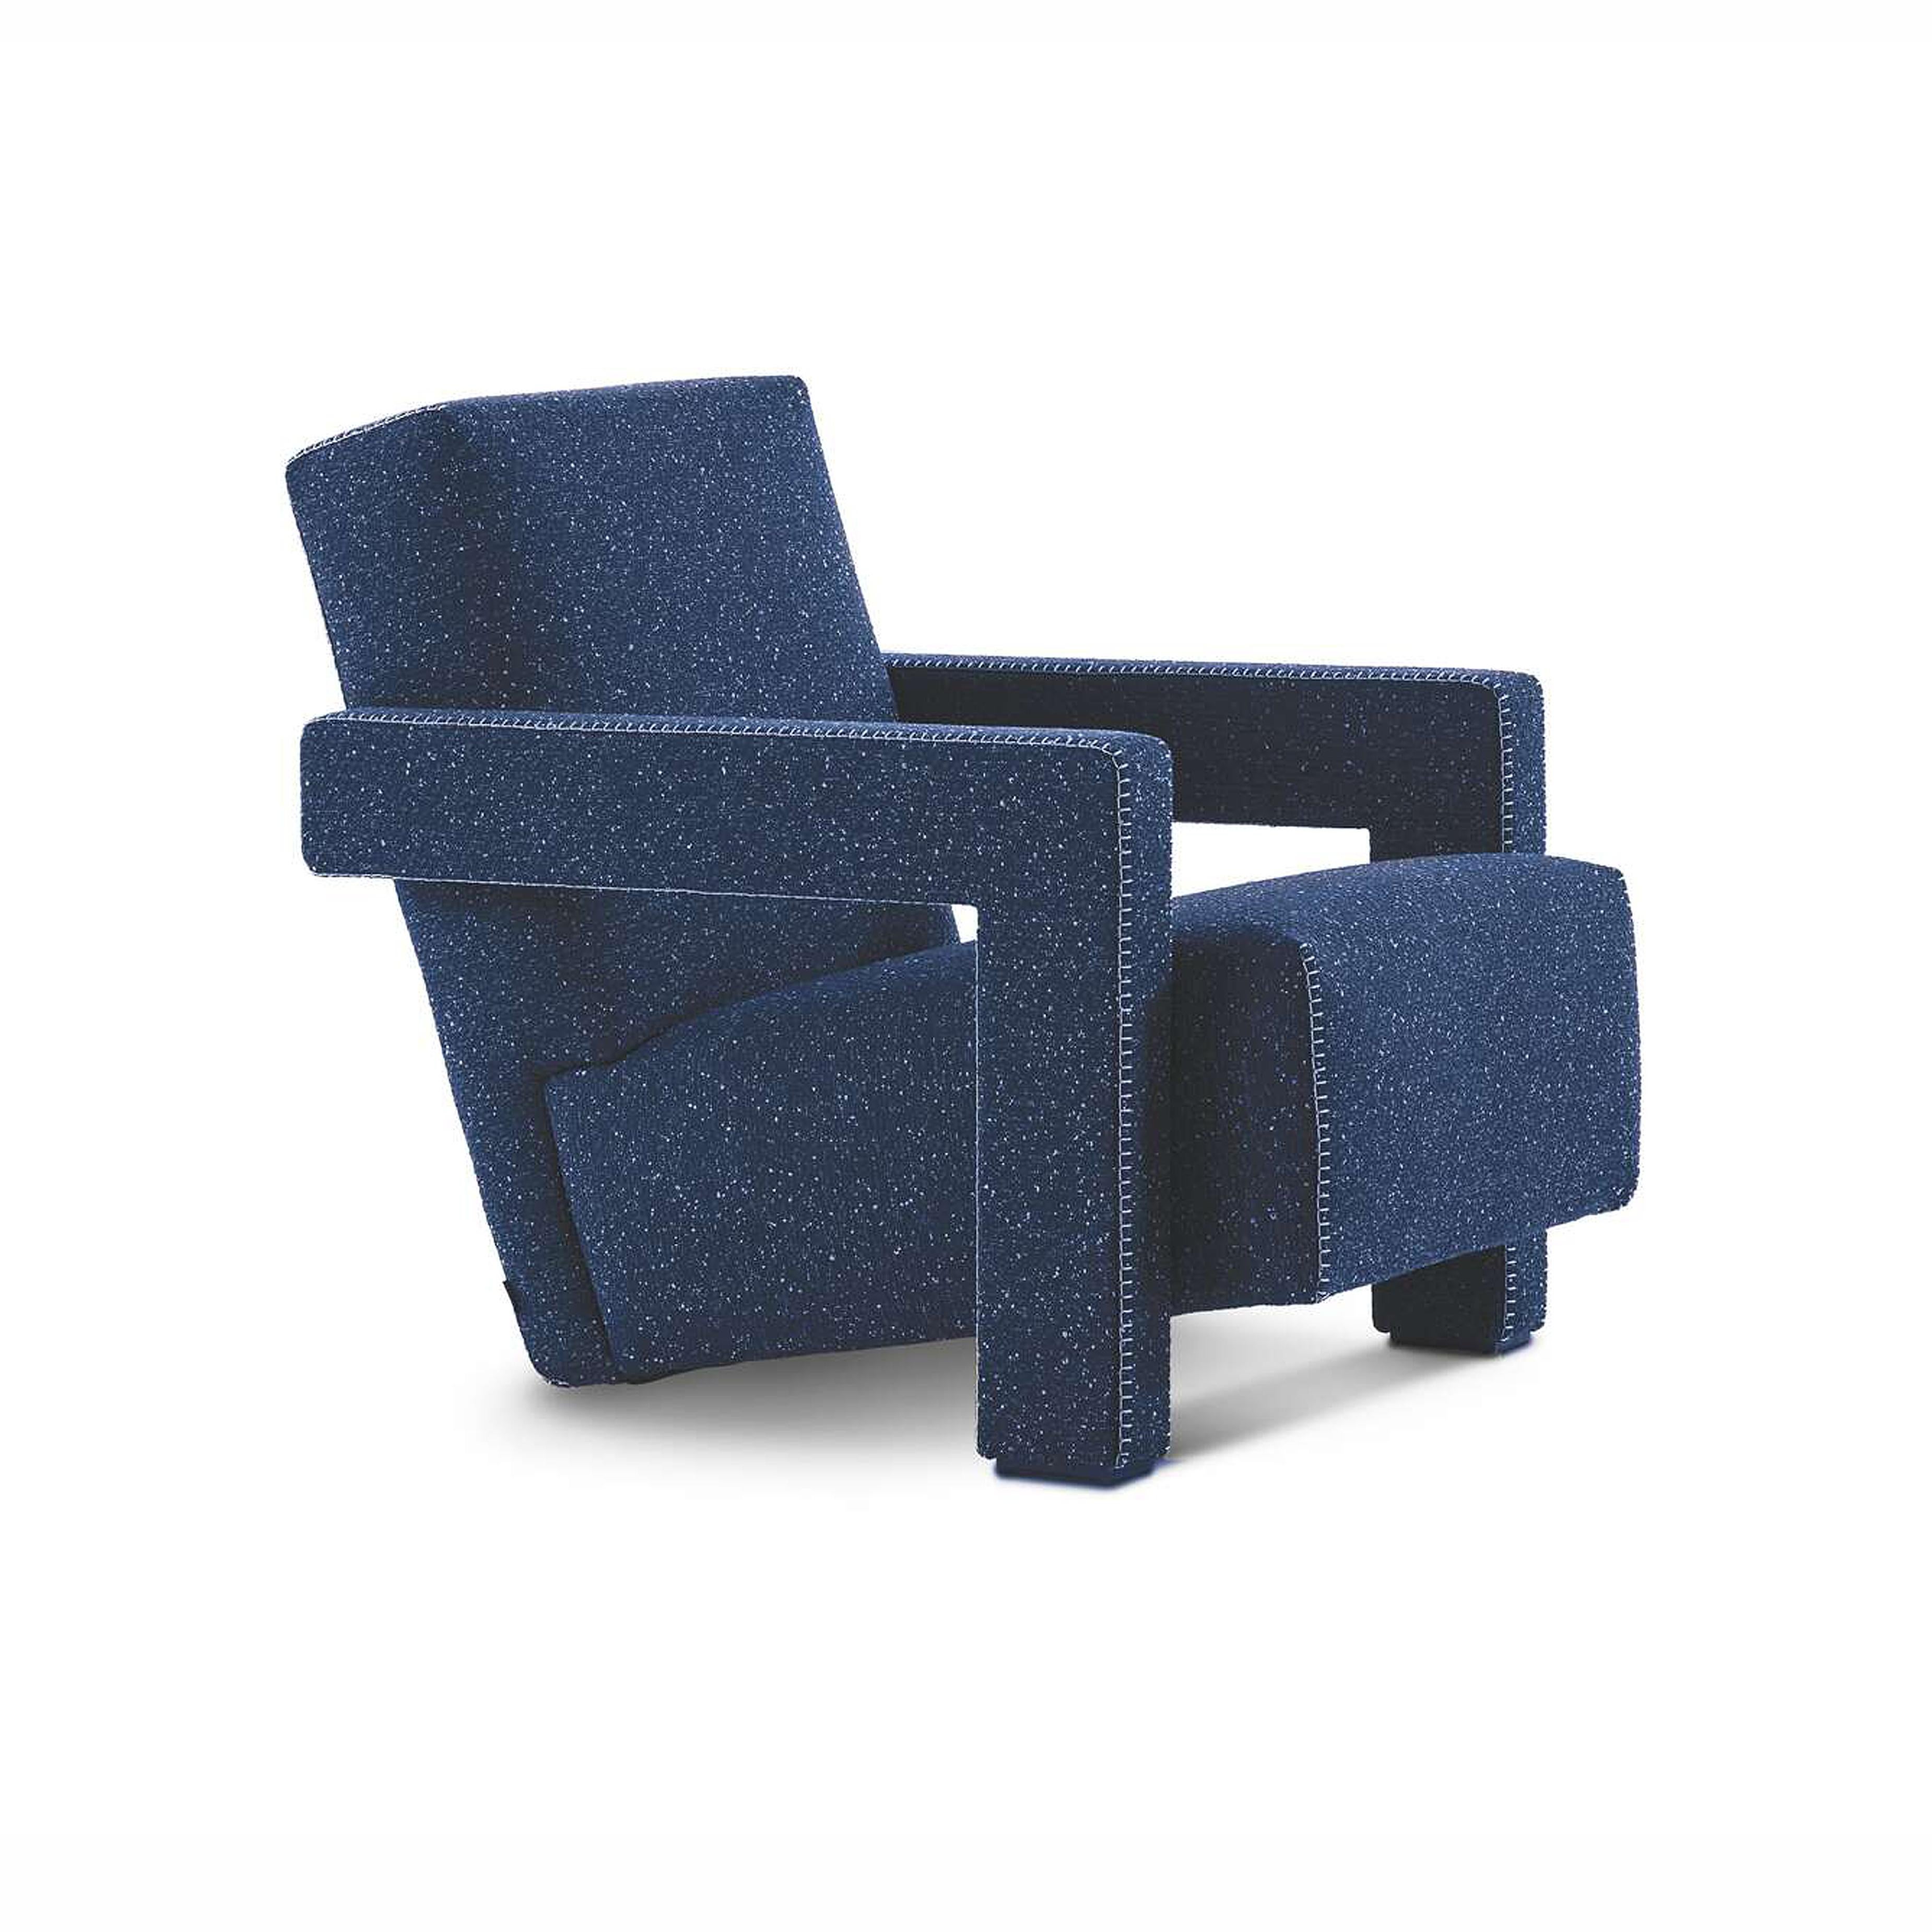 Gerrit Thomas Rietveld Utrech Armchair by Cassina In New Condition For Sale In Barcelona, Barcelona